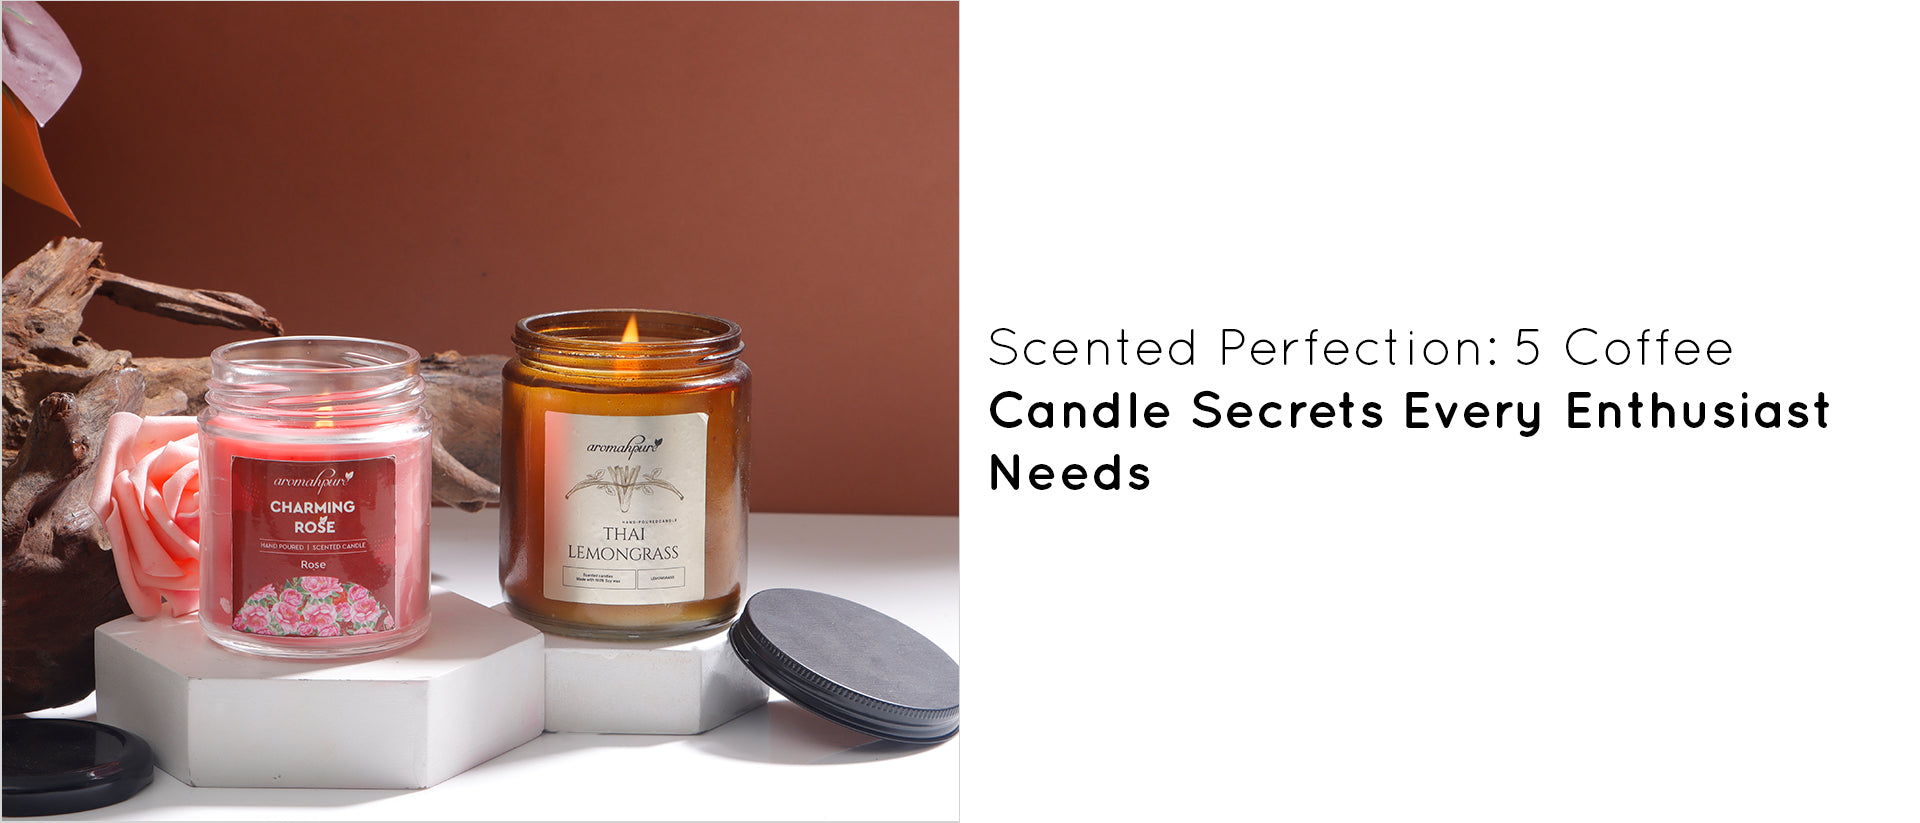 Scented Perfection: 5 Coffee Candle Secrets Every Enthusiast Needs